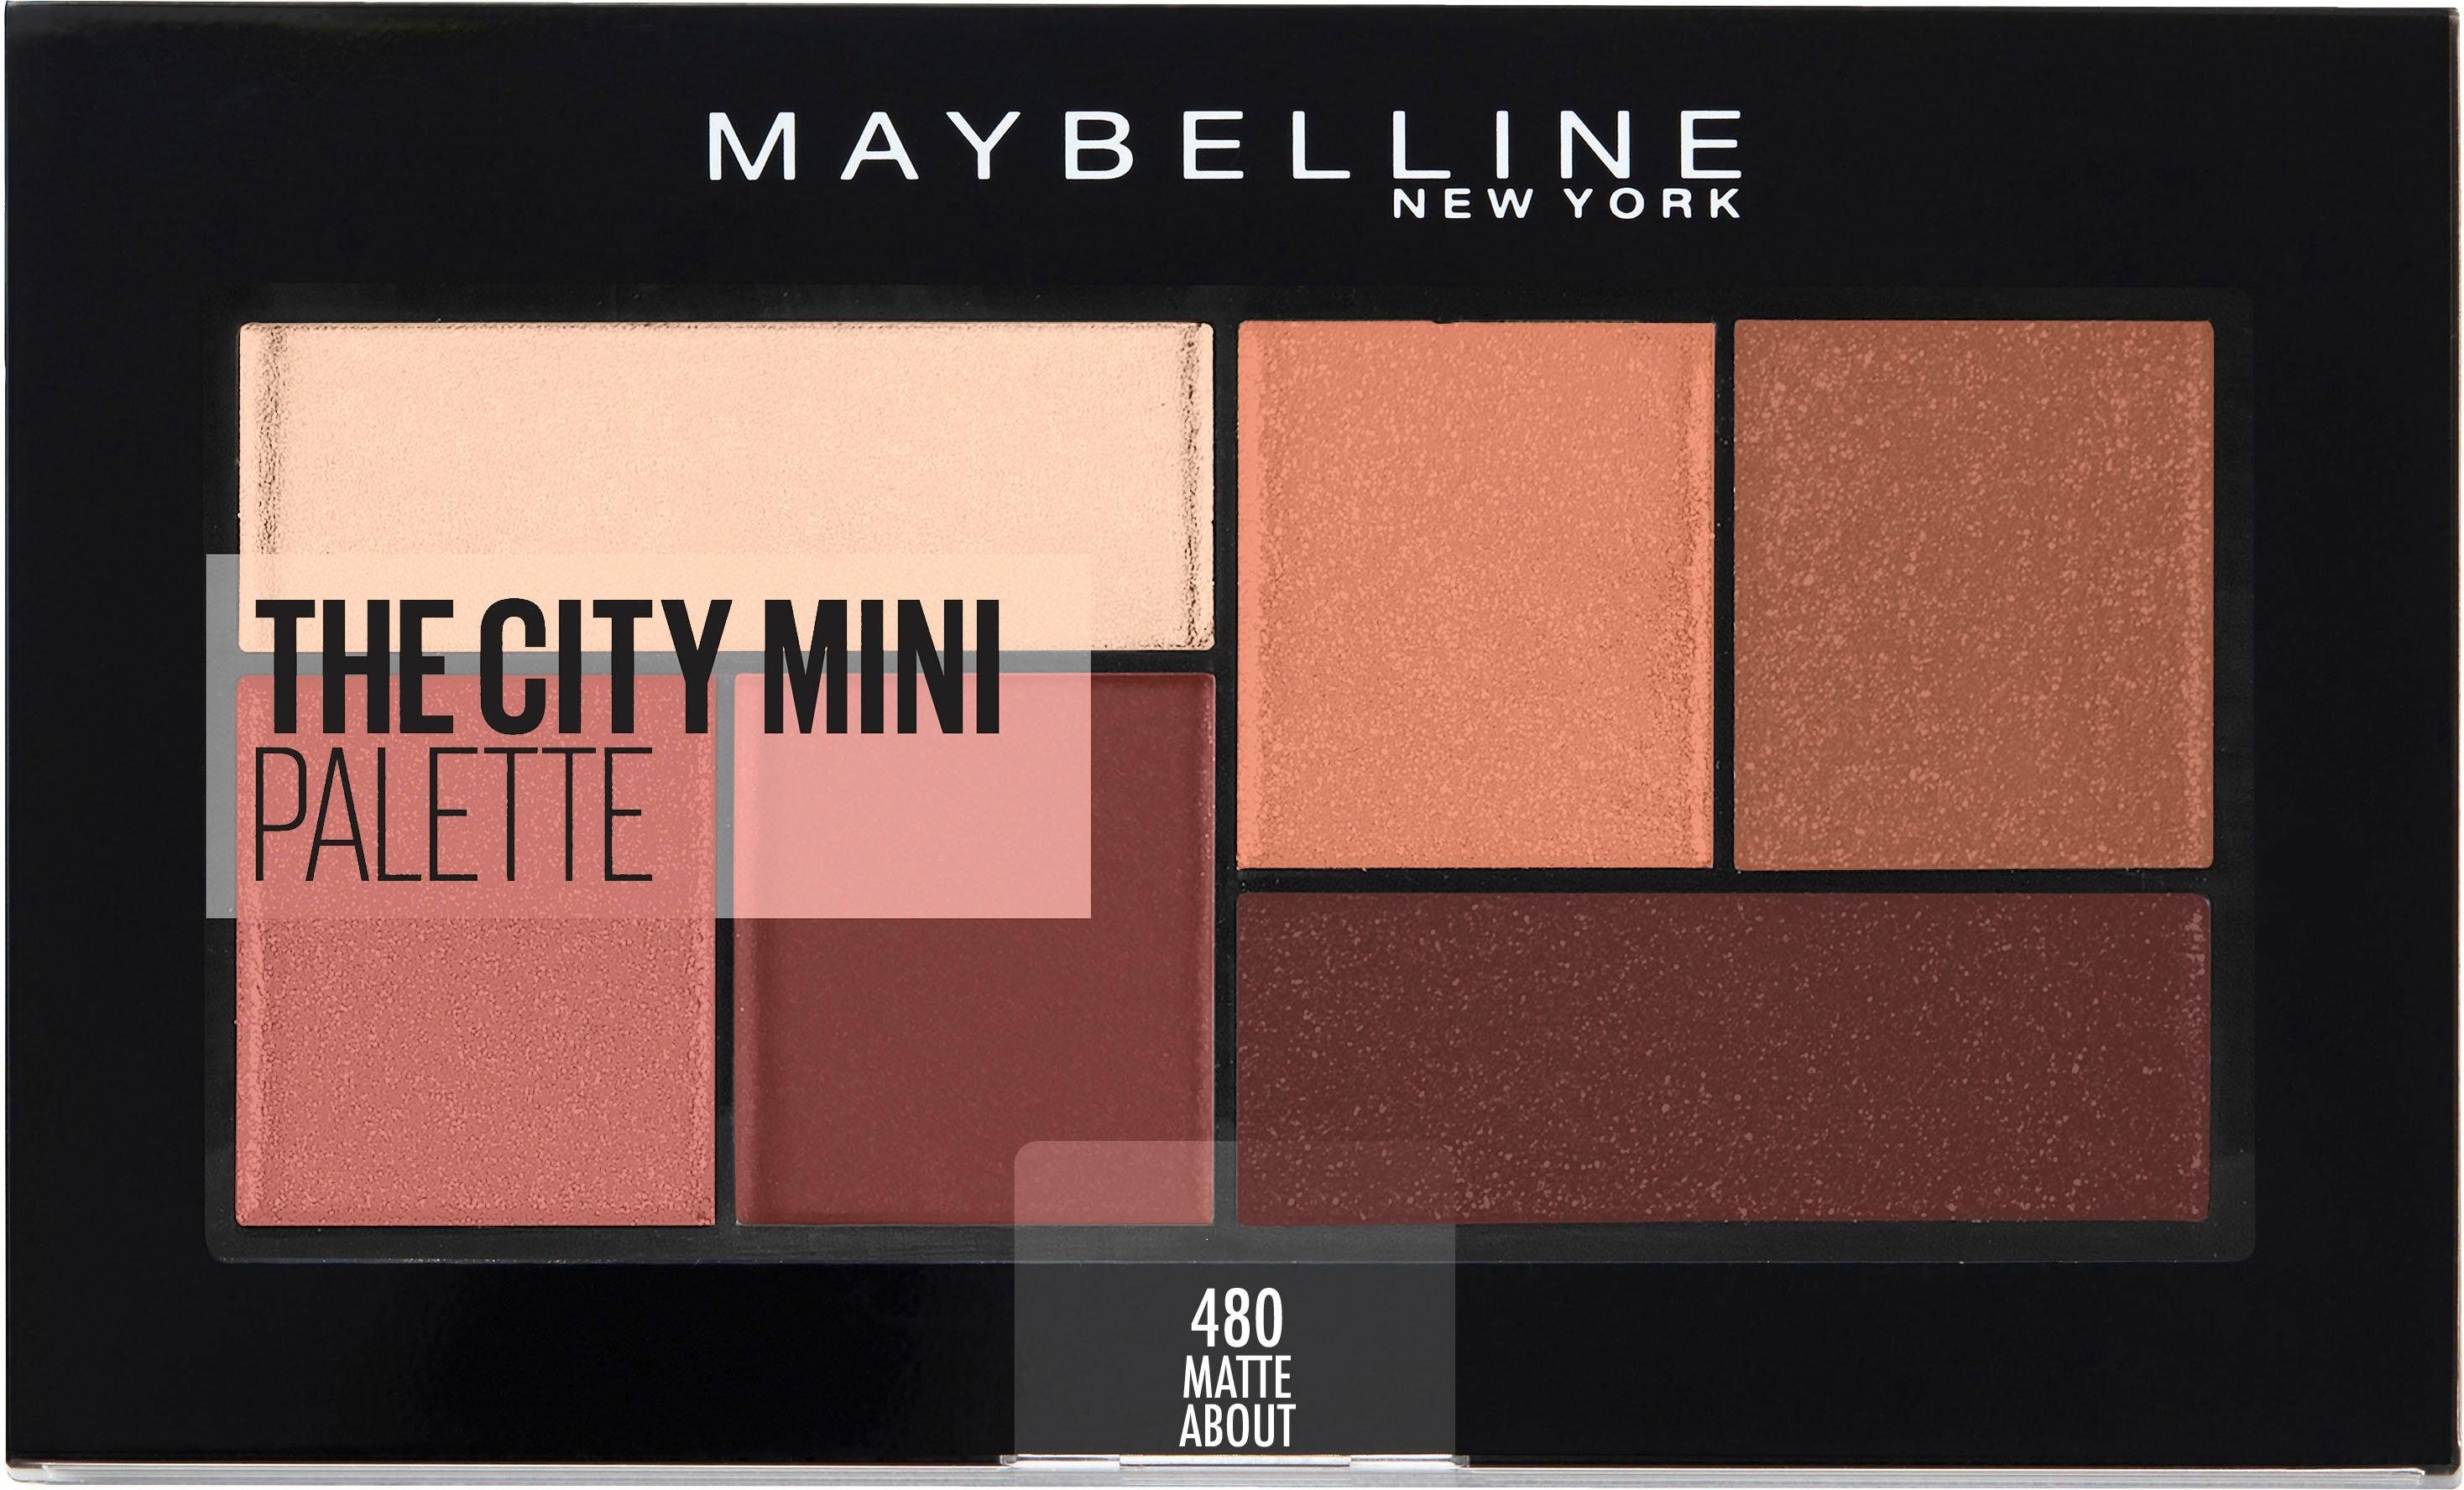 MAYBELLINE Lidschatten-Palette Matte Mini, City The NEW About Town YORK